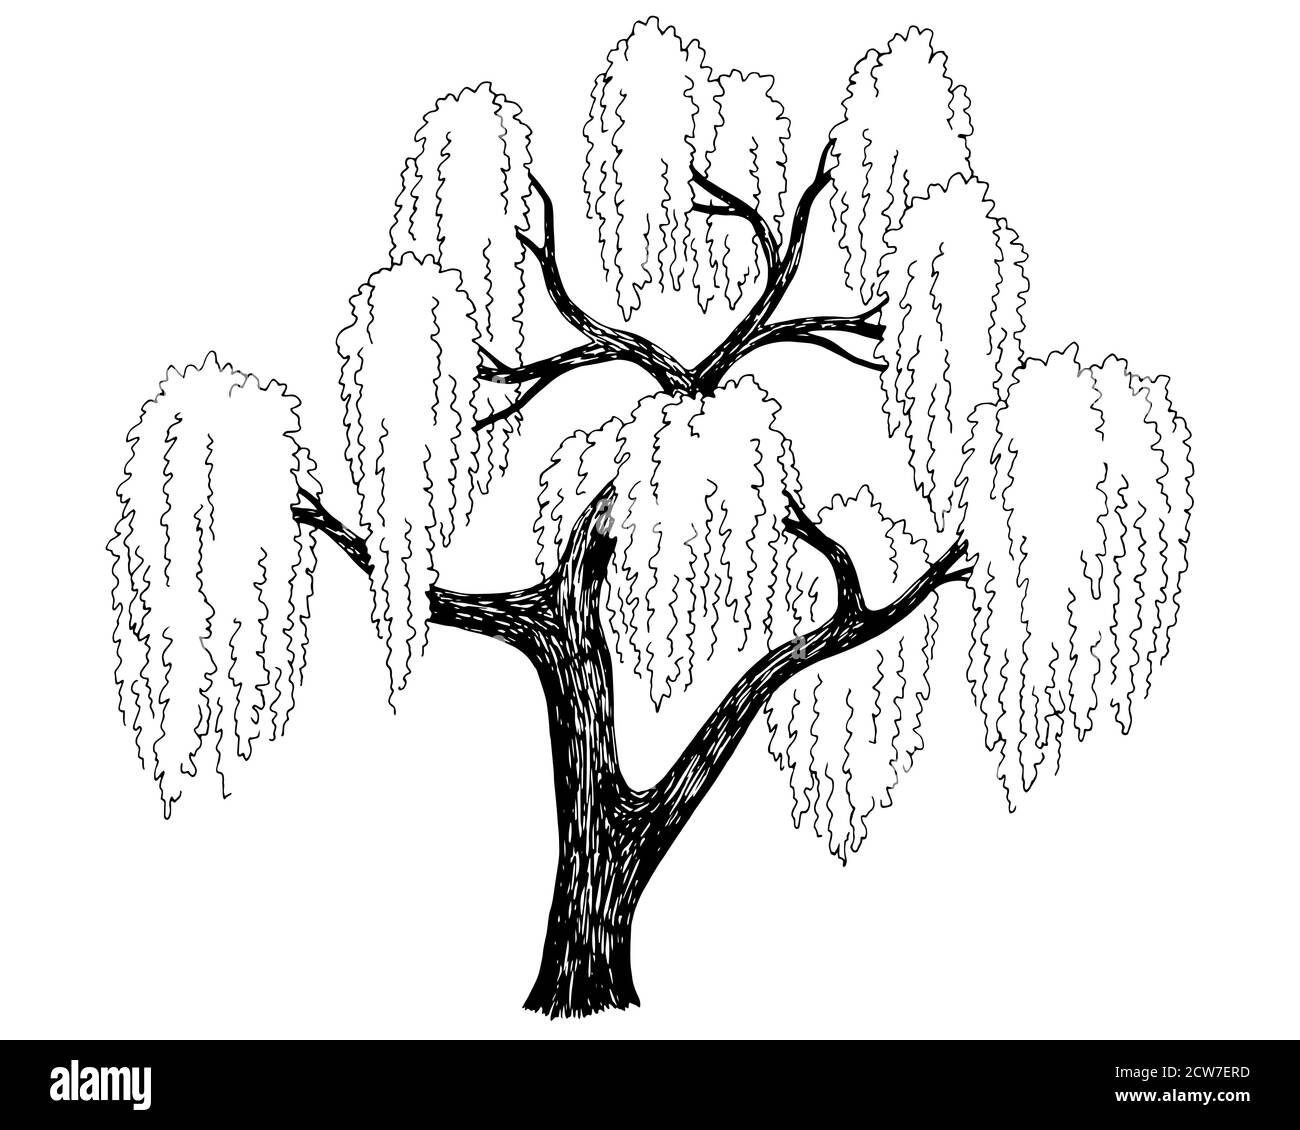  How to Draw a Willow Tree A StepbyStep Guide   Mast Producing Trees